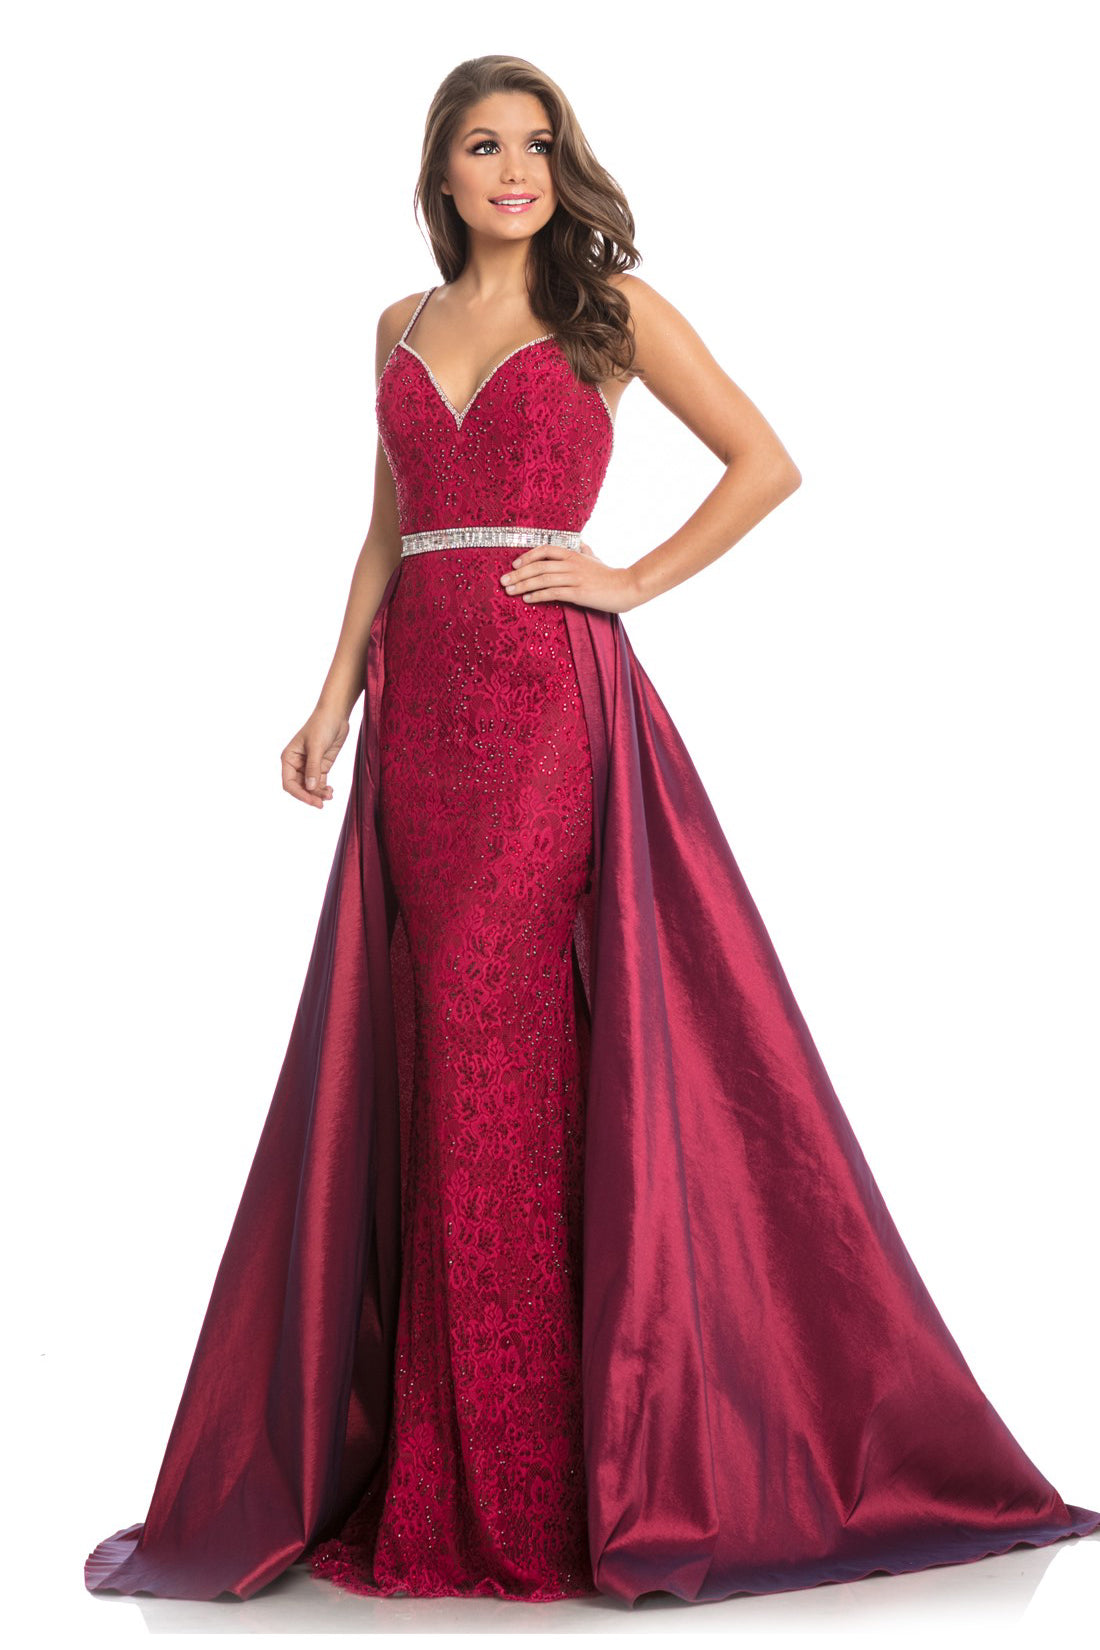 Johnathan Kayne 7242 is a lace Prom Dress, Pageant Gown & Formal Evening Wear. The structured bodice of this A/B crystal adorned stretch lace gown offers excellent, supportive construction. The column skirt falls over the hip and is framed by the dramatic taffeta hostess skirt that flows around the body.